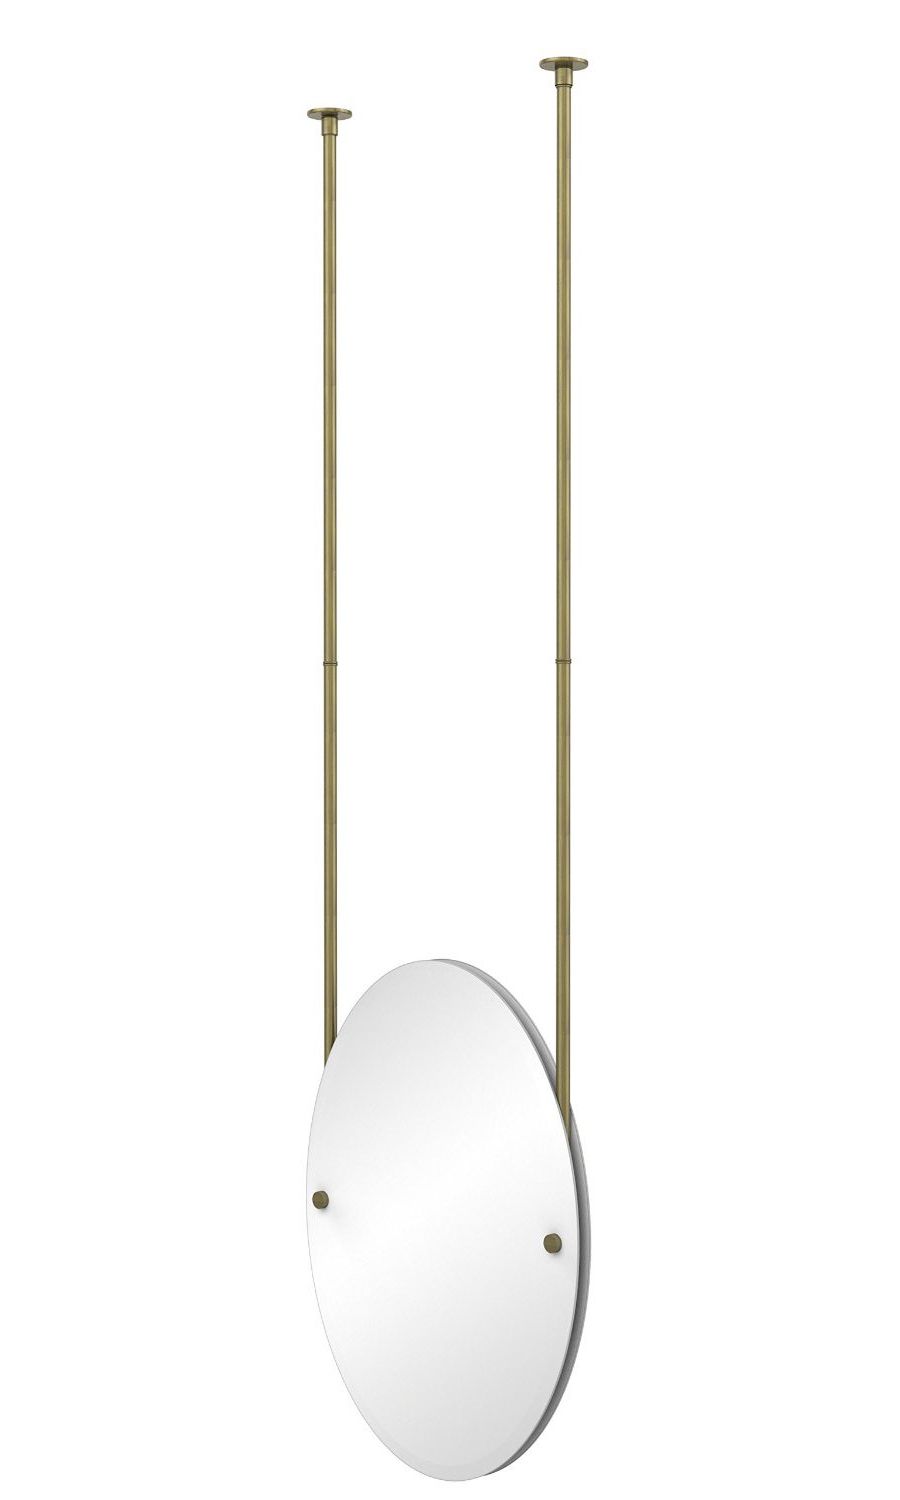 Ceiling Hung Polished Nickel Oval Mirrors Intended For Best And Newest Allied Brass Ch 91 Oval Ceiling Hung Mirror With Solid Brass Hardware (View 6 of 15)